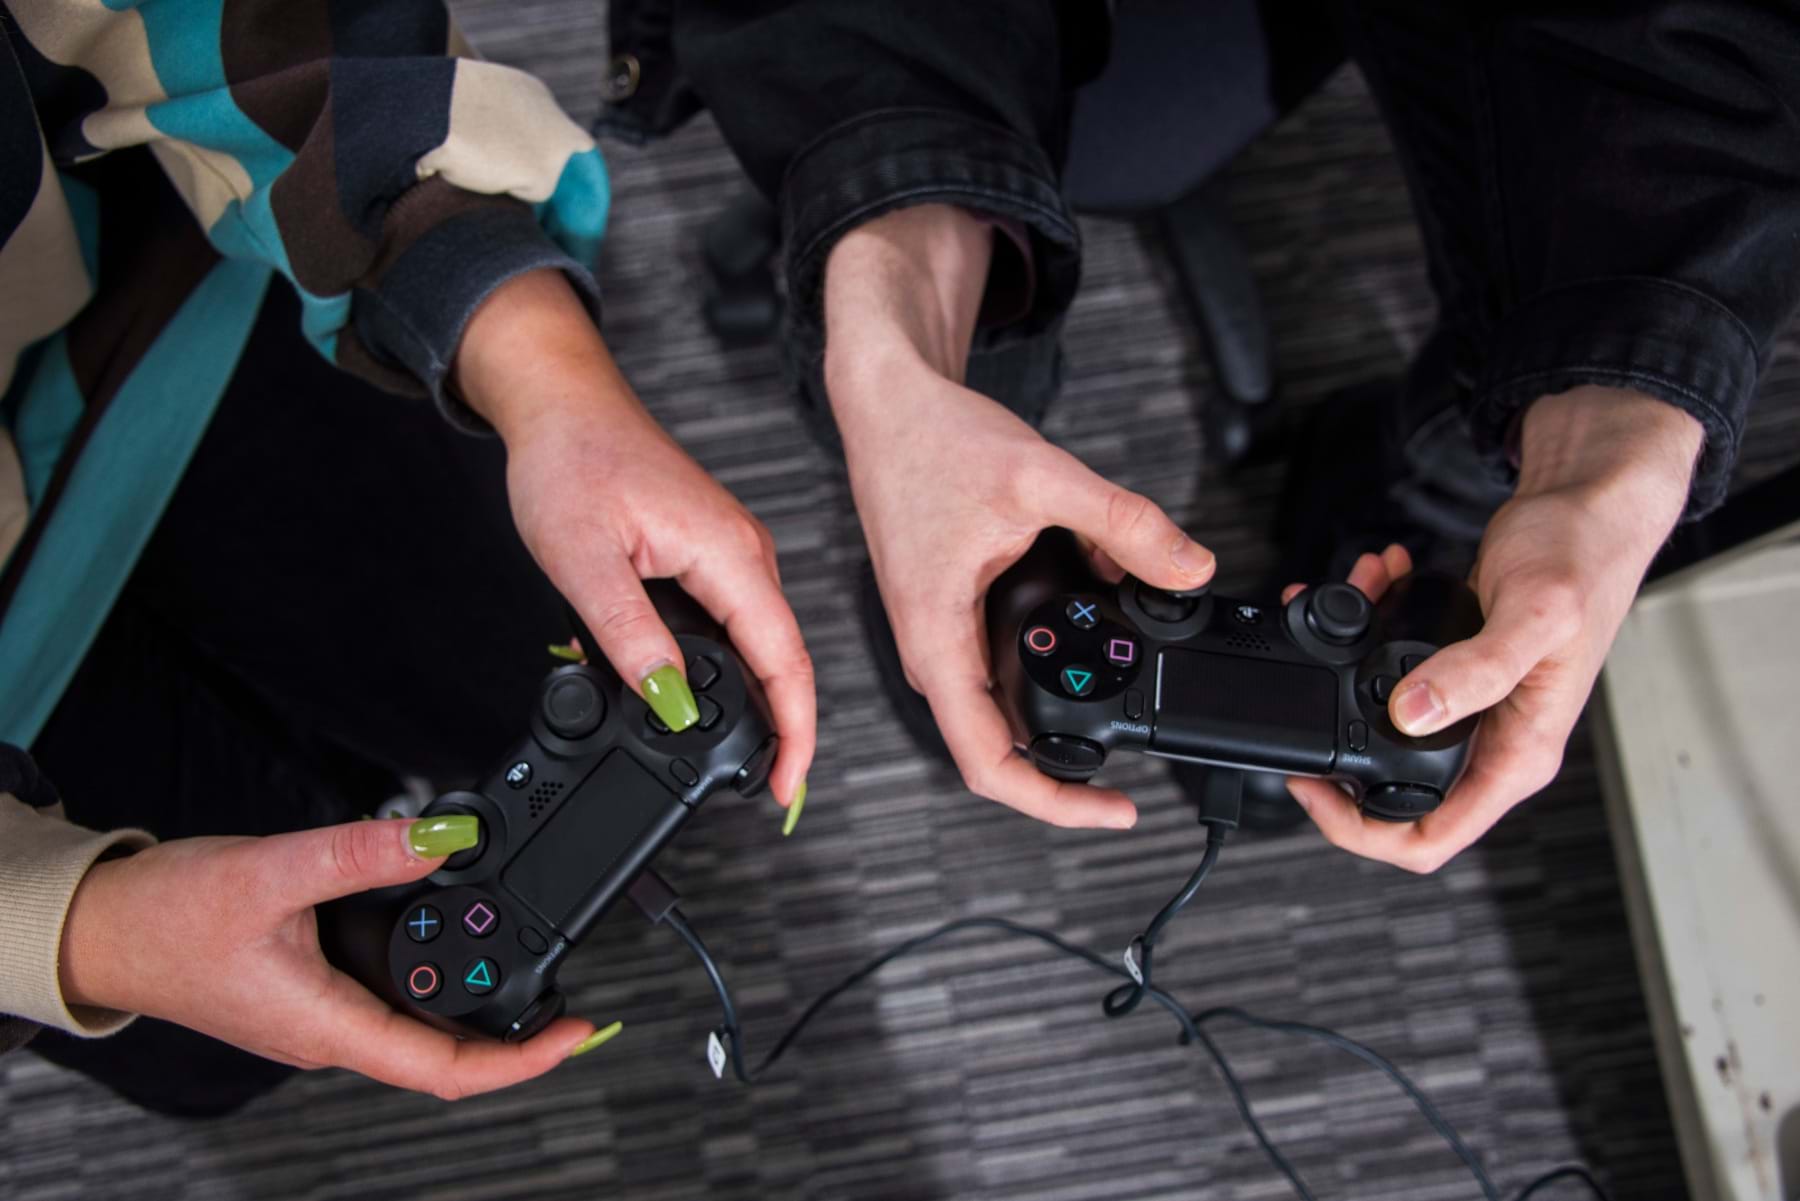 The image shows two hands showing two game pads. One of the hands has painted nails.